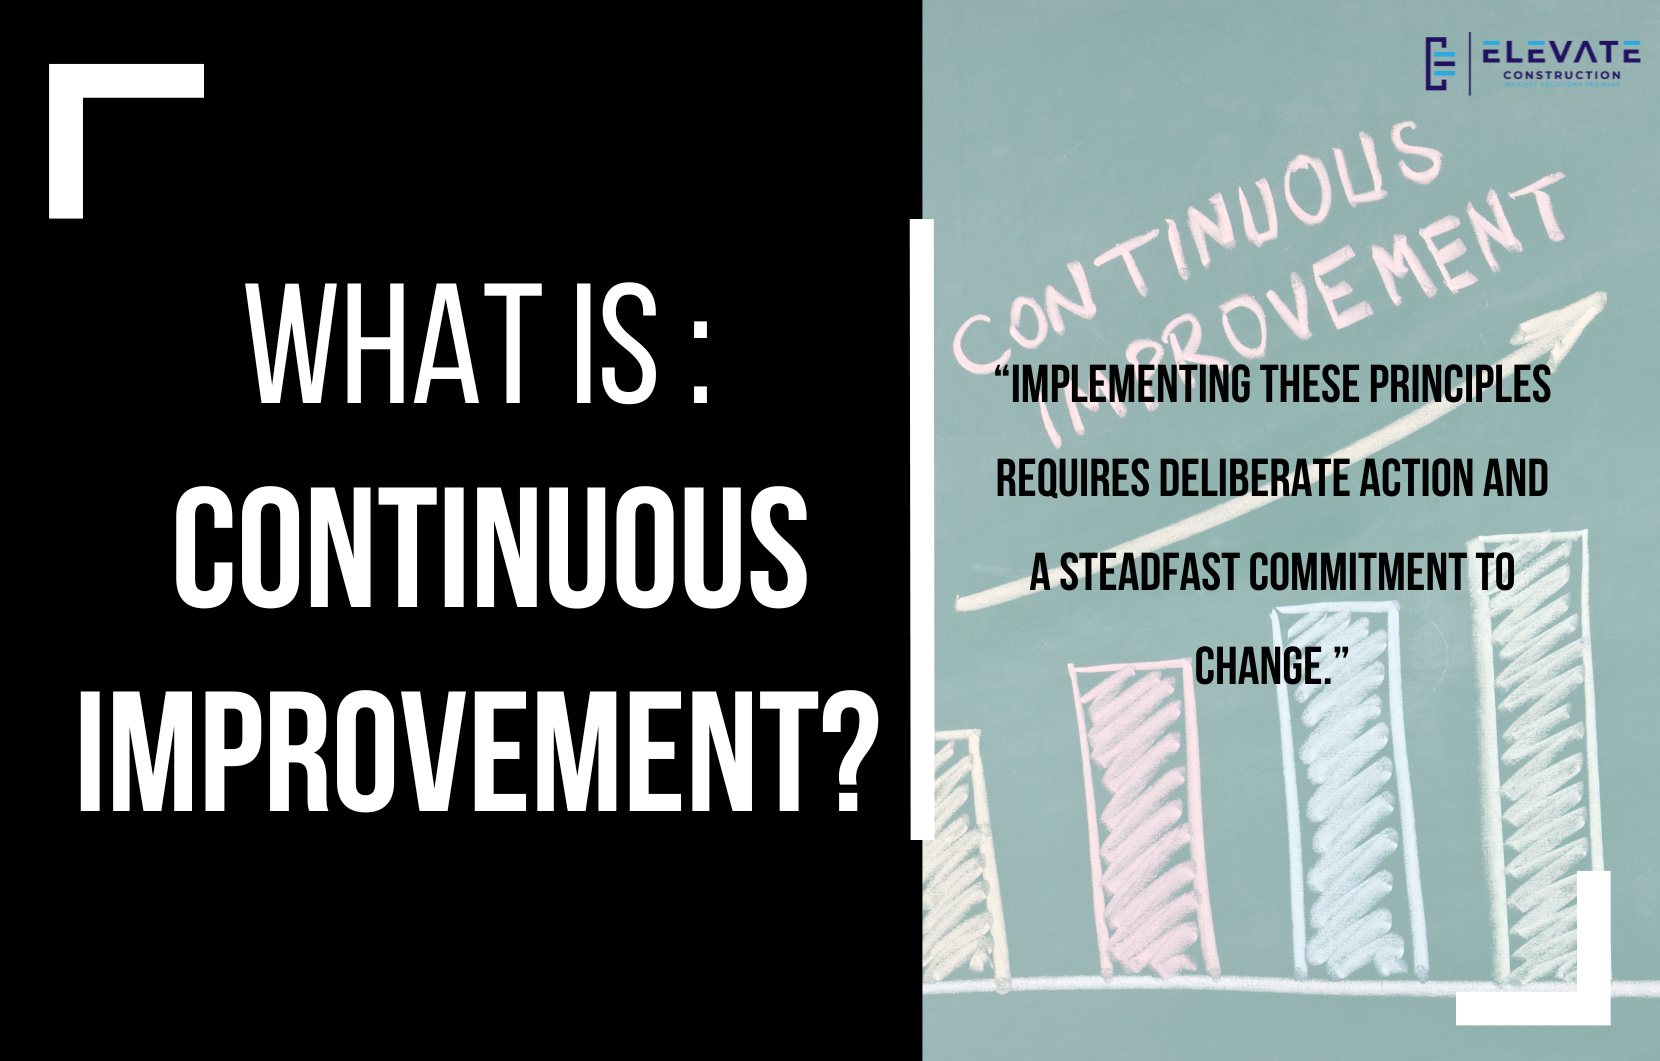 What Is Continuous Improvement?